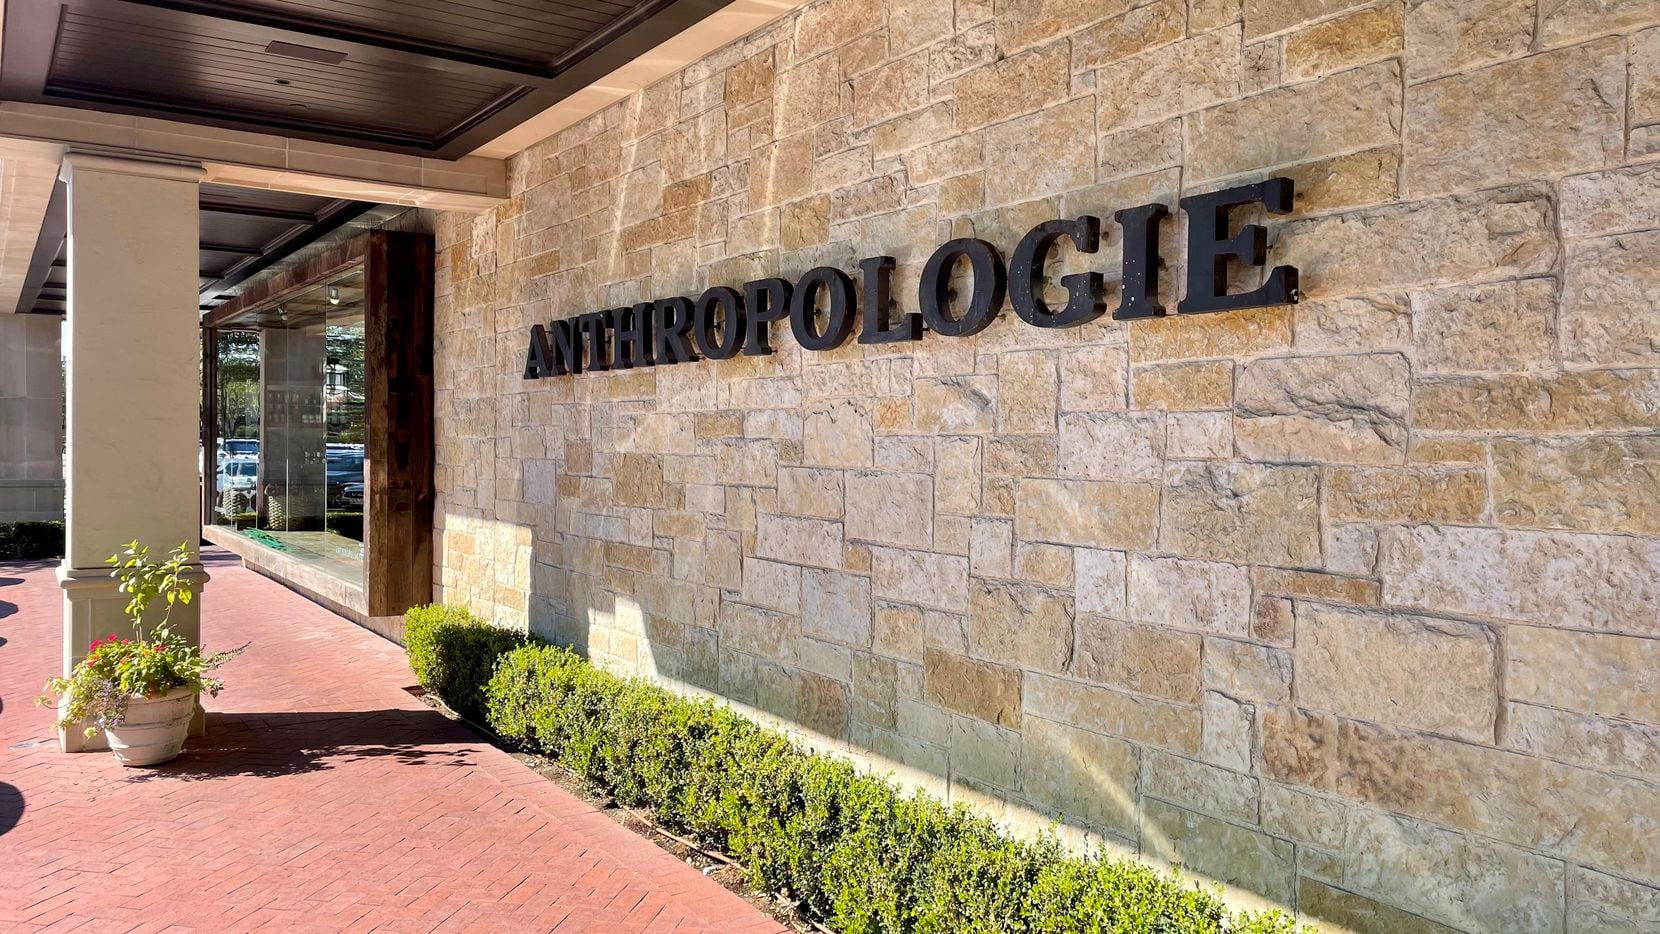 Anthropologie closed at Highland Park Village last week. The retailer is moving to Knox...